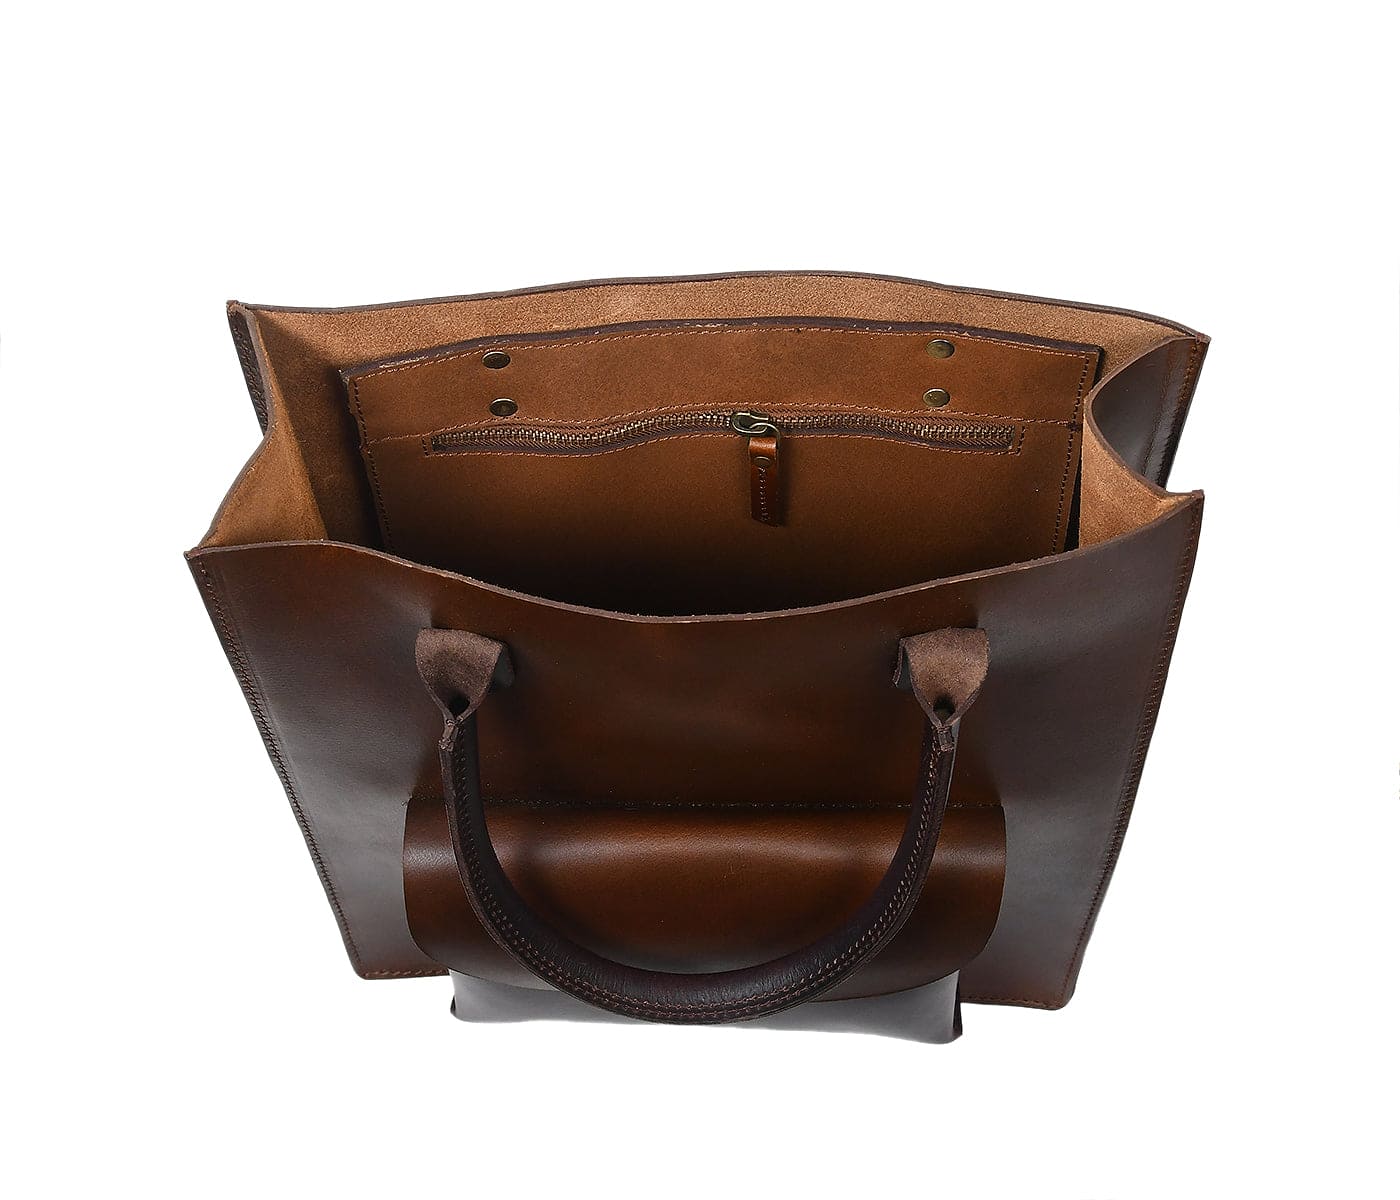 Elegance in Brown: Discover Our Exquisite Brown Leather Shopper Bag ...